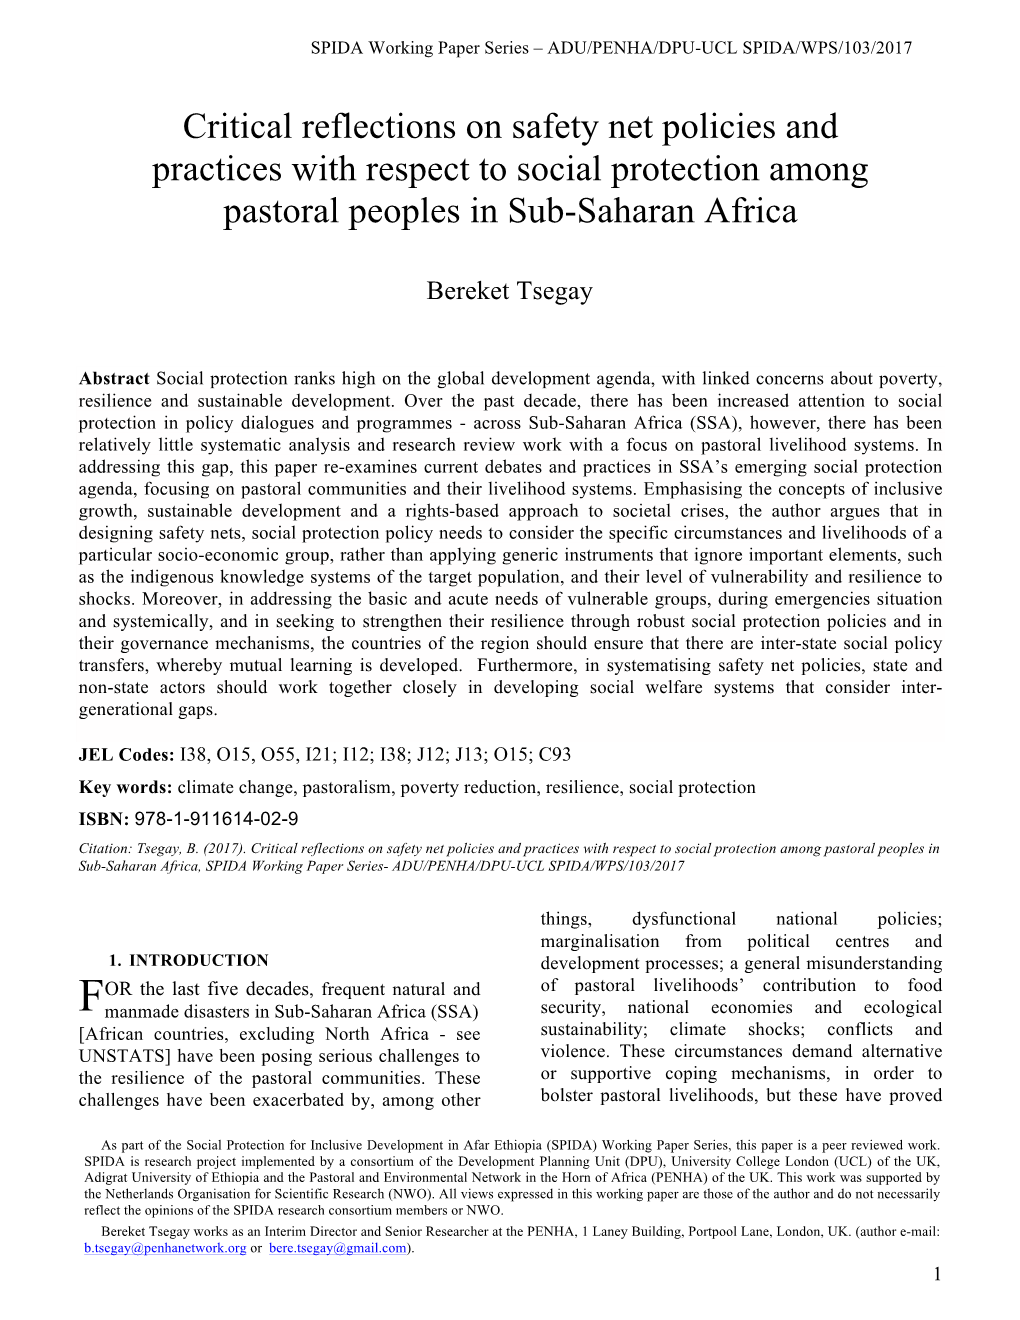 Critical Reflections on Safety Net Policies and Practices with Respect to Social Protection Among Pastoral Peoples in Sub-Saharan Africa